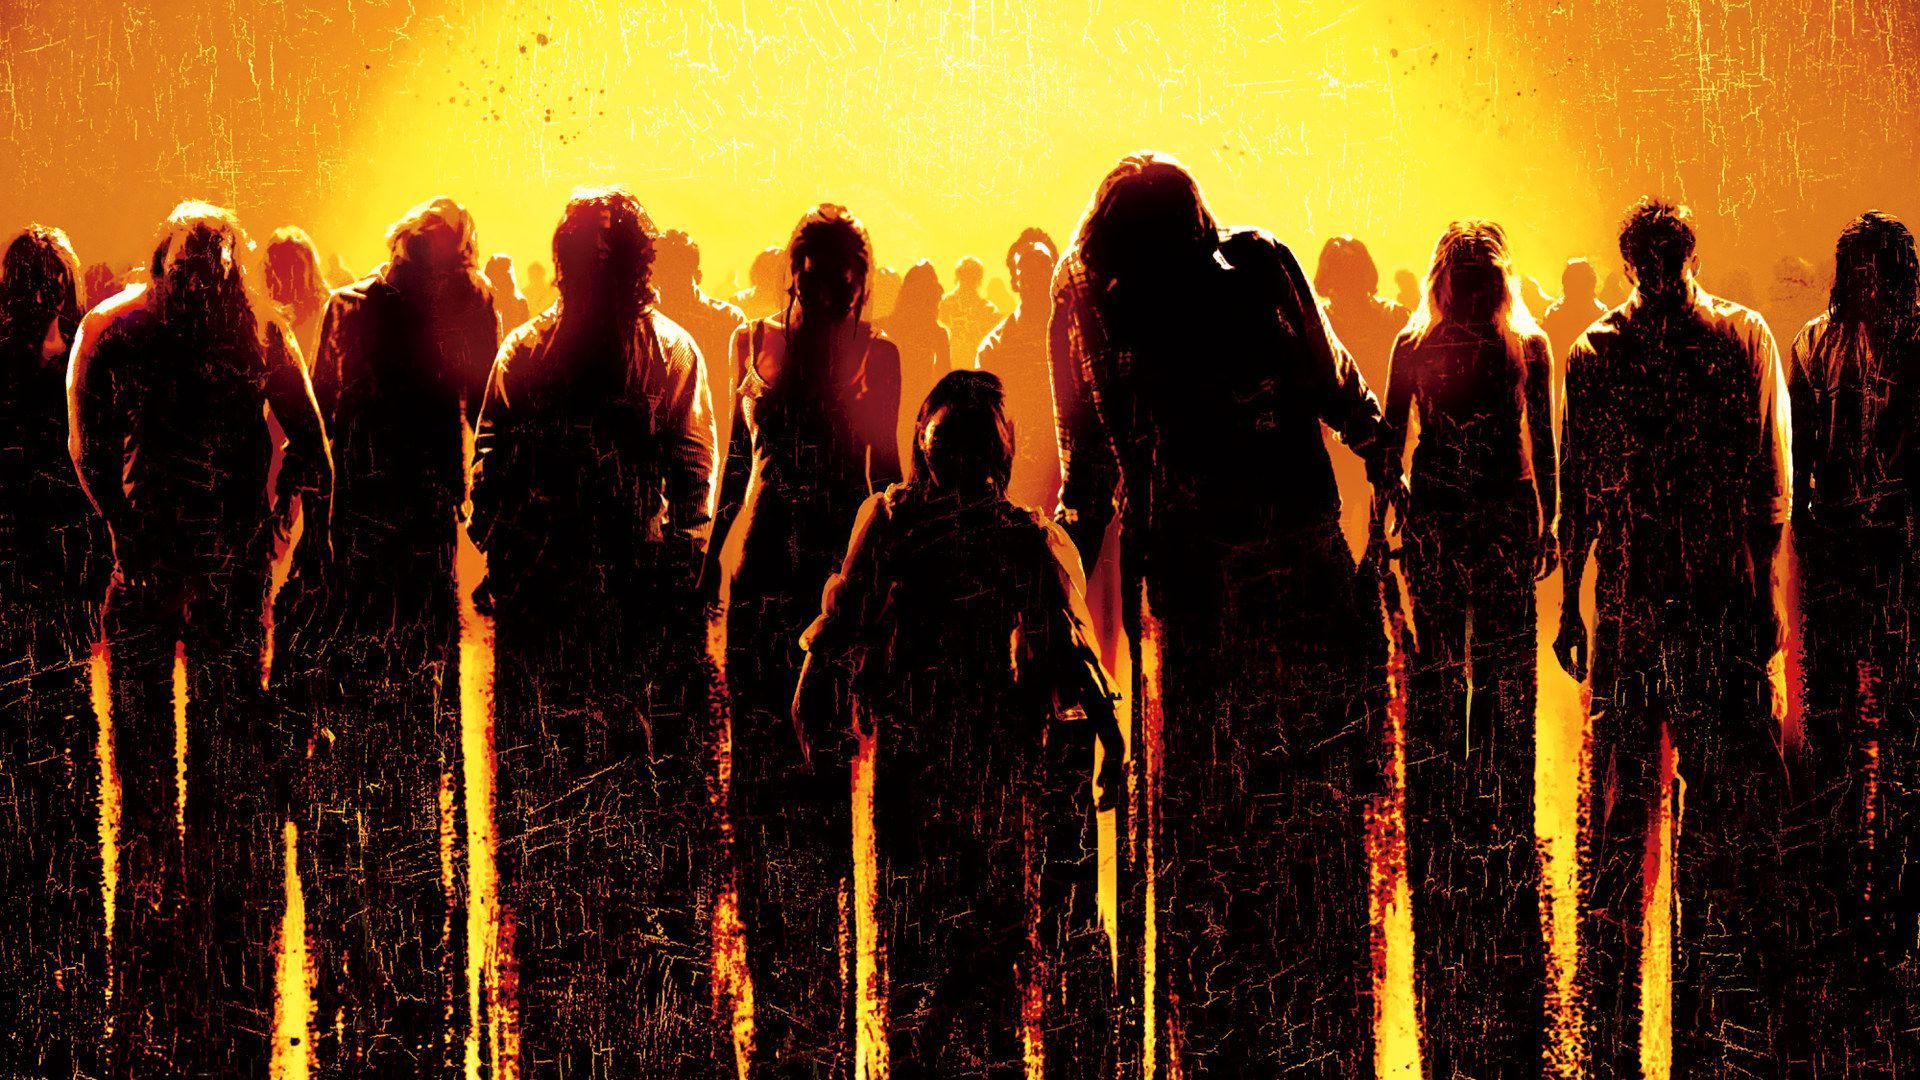 Zombie Awesome Wallpapers 10346 - HD Wallpapers Site